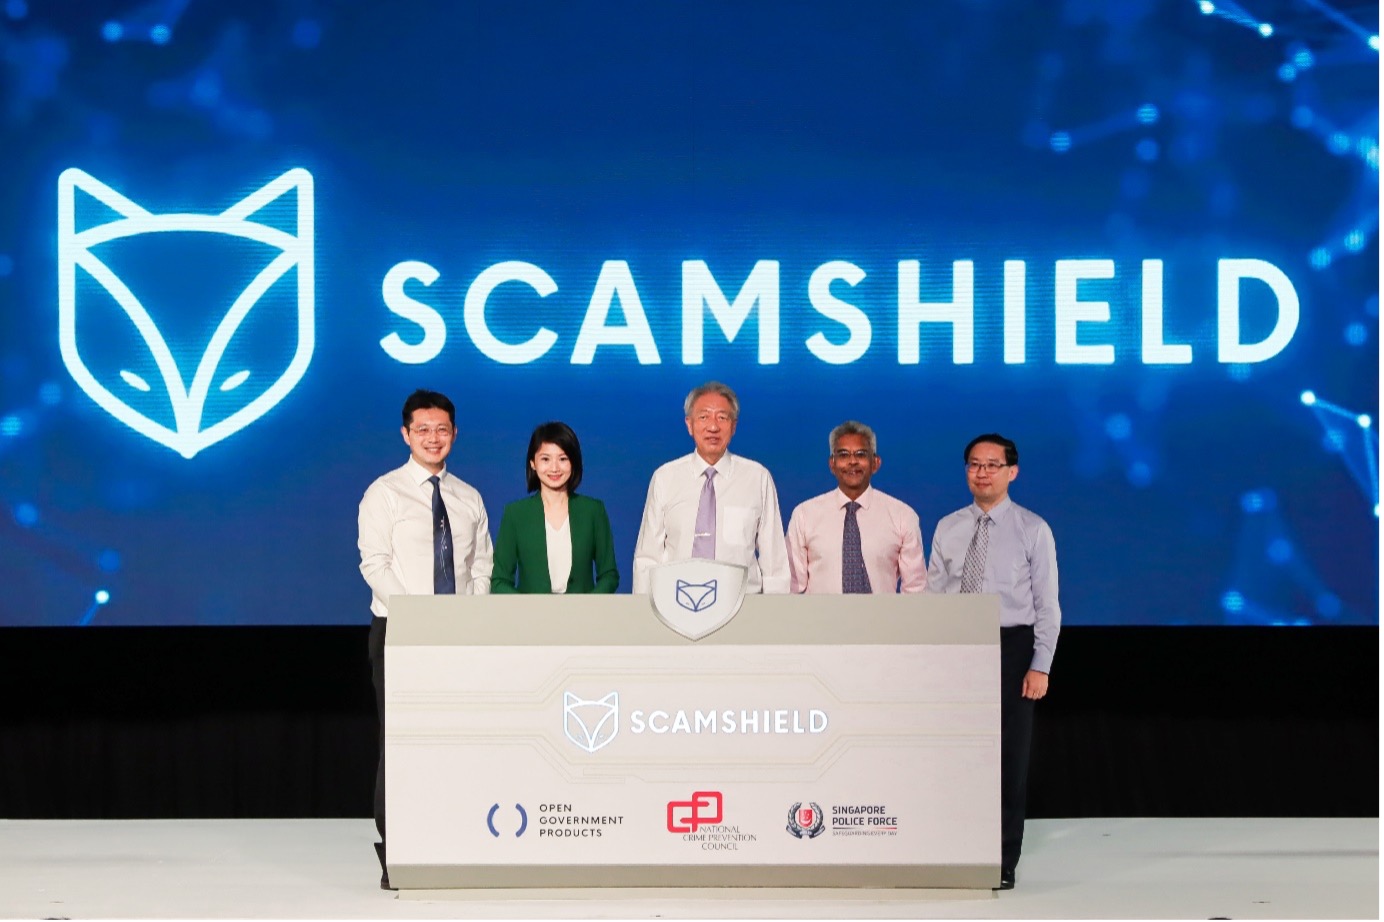 ScamShield (Android) Launched At NCPC 40th Anniversary Event